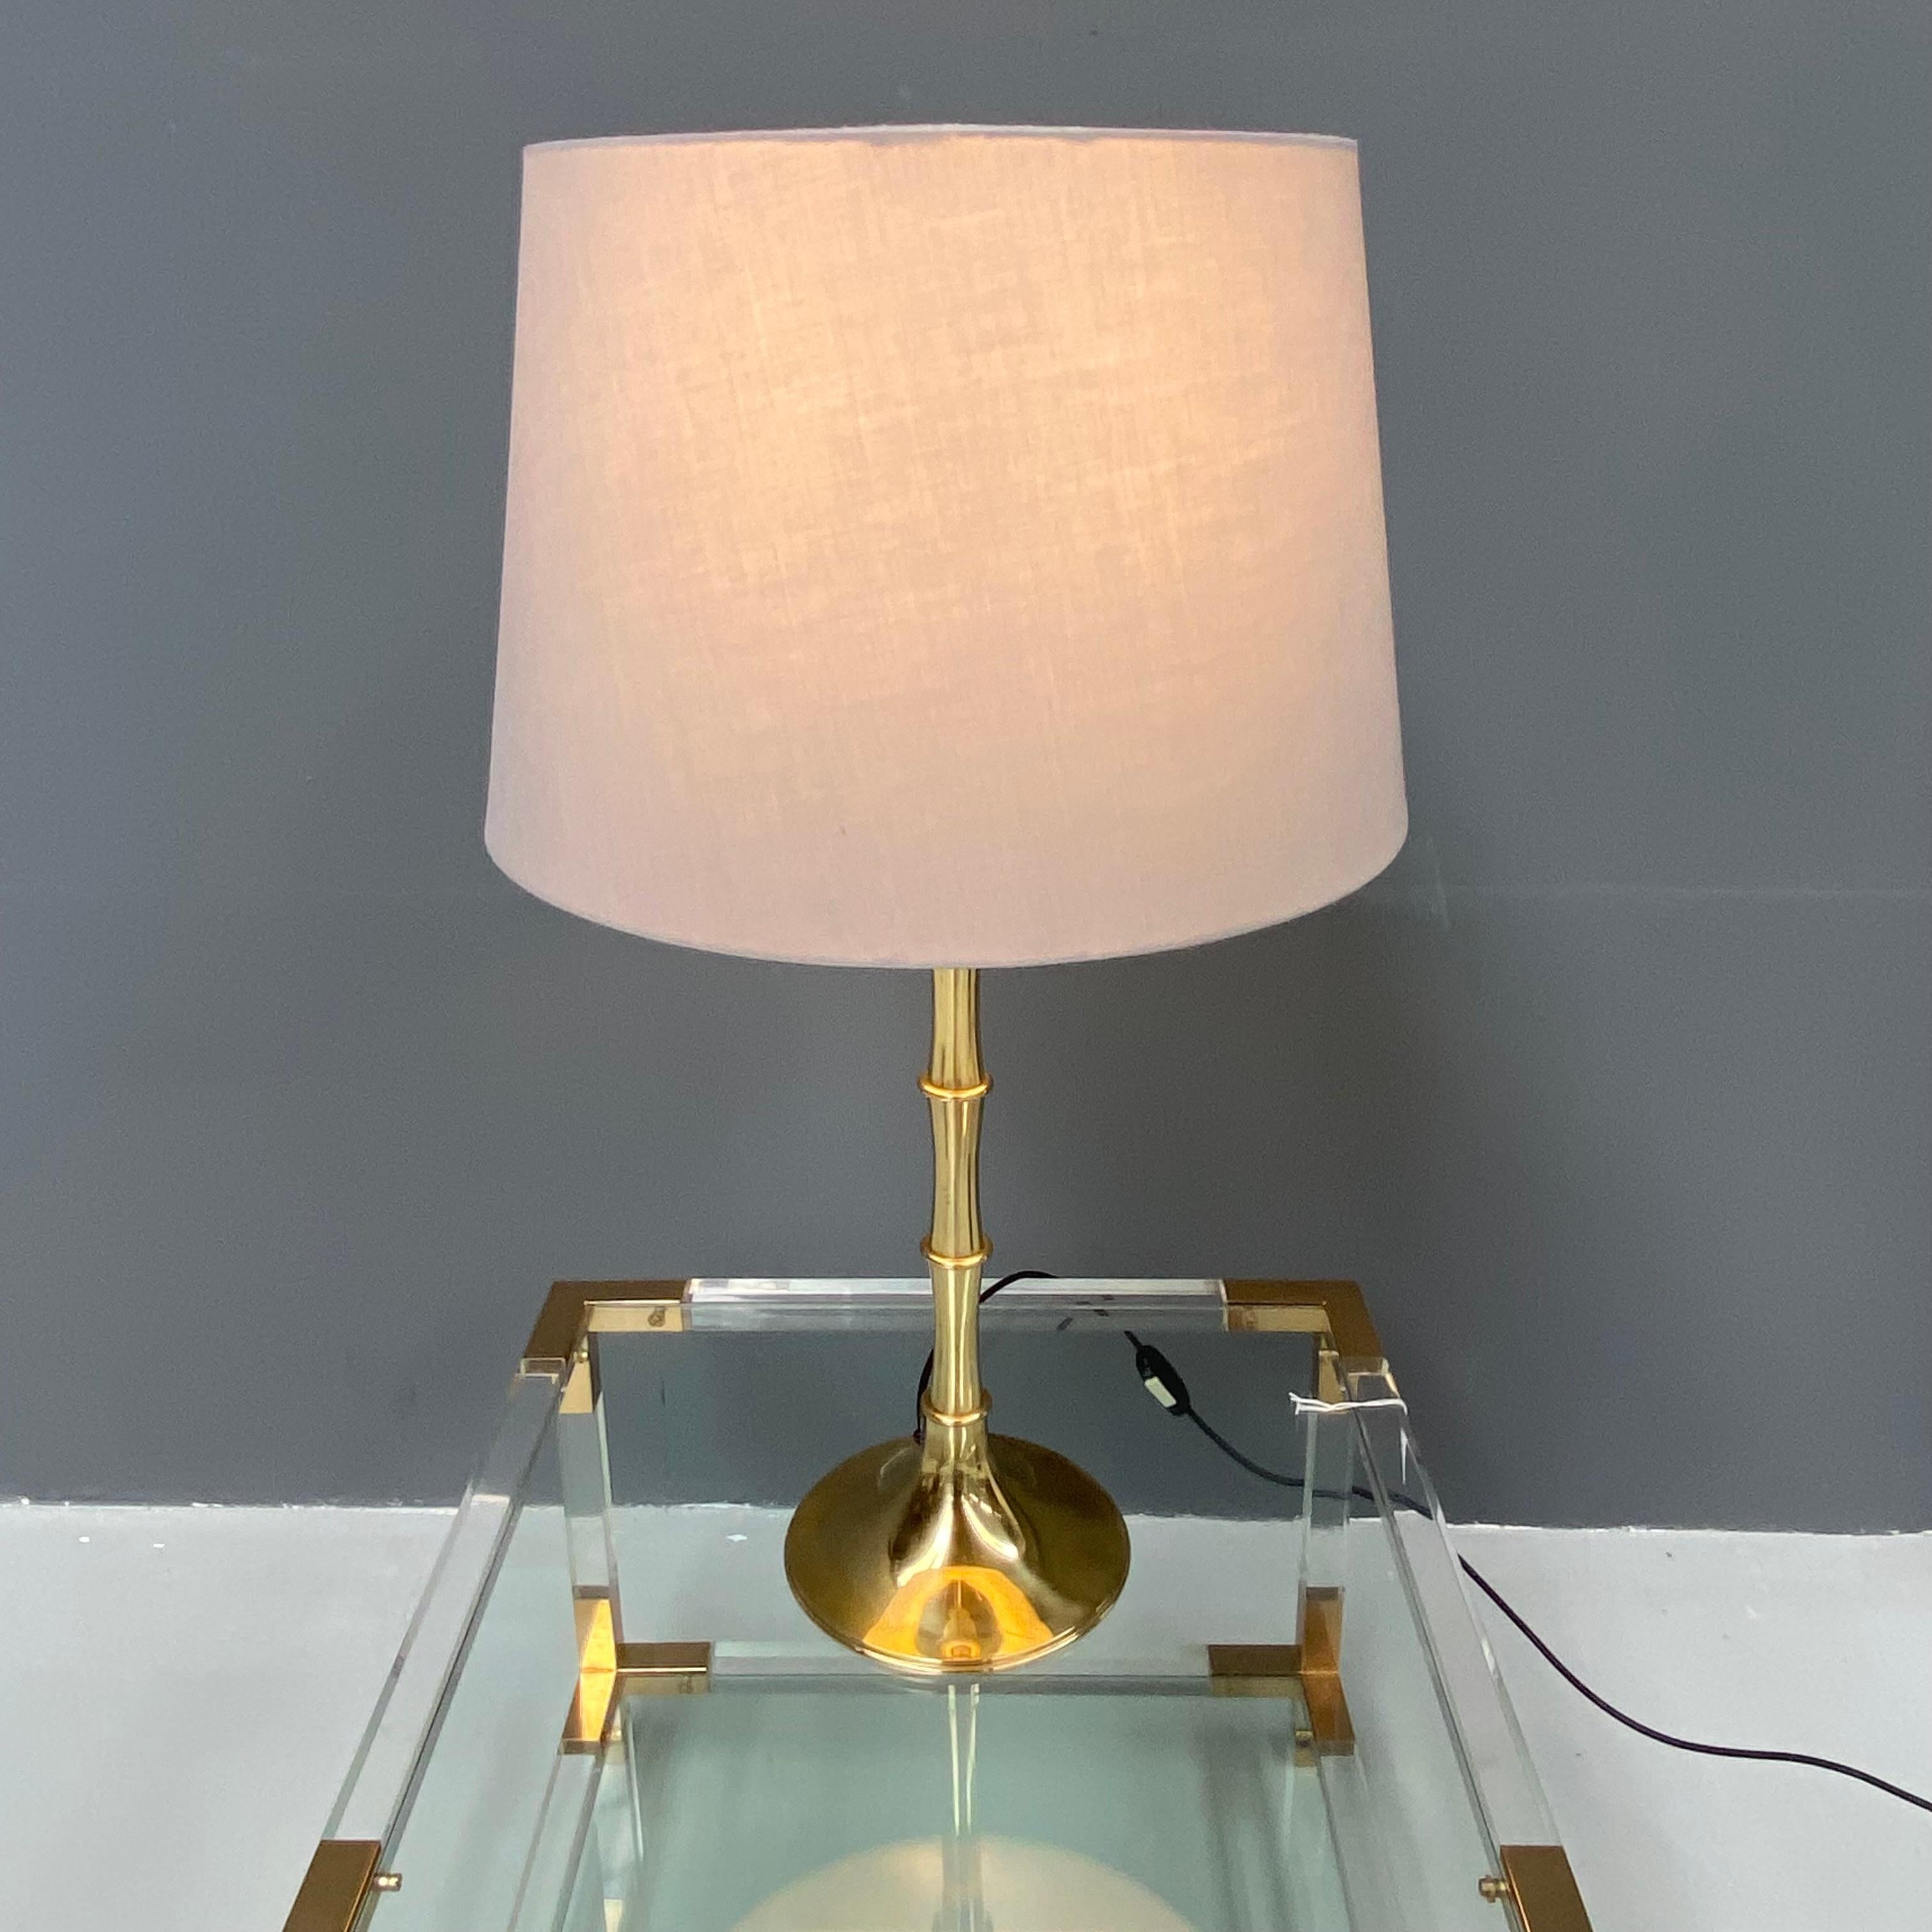 Vintage Bamboo Table Lamp in Brass by Ingo Maurer for M Design, 1960s. For Sale 2